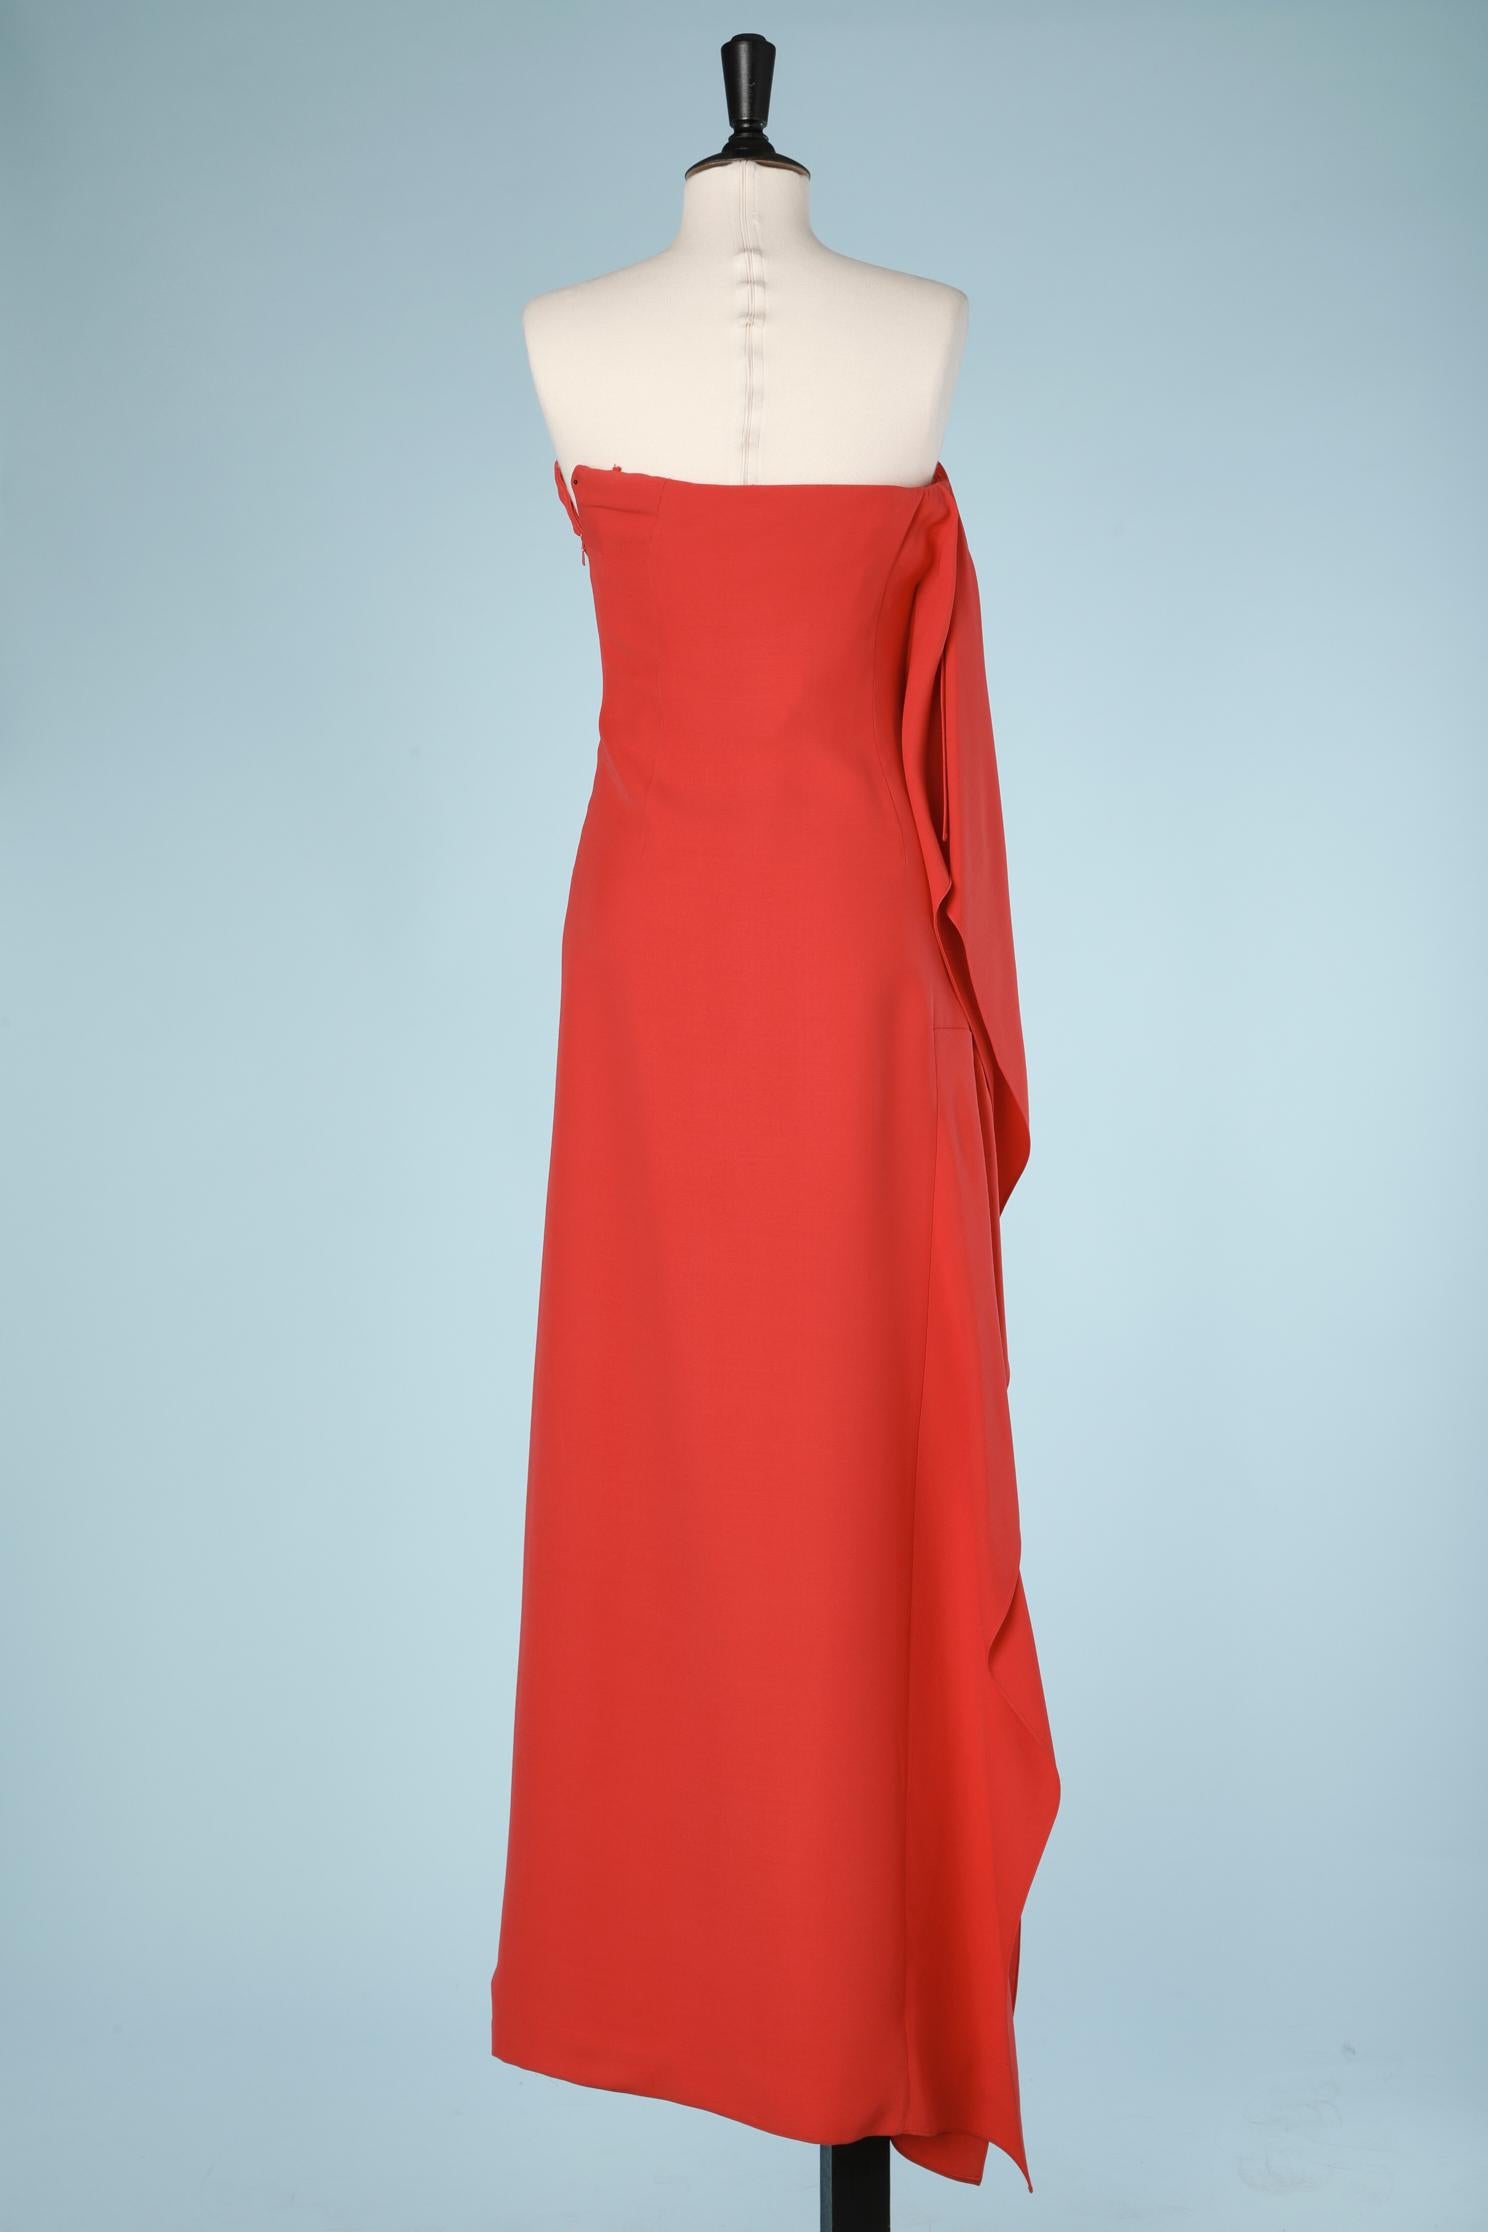 Red Long bustier cocktail dress Christian Dior 